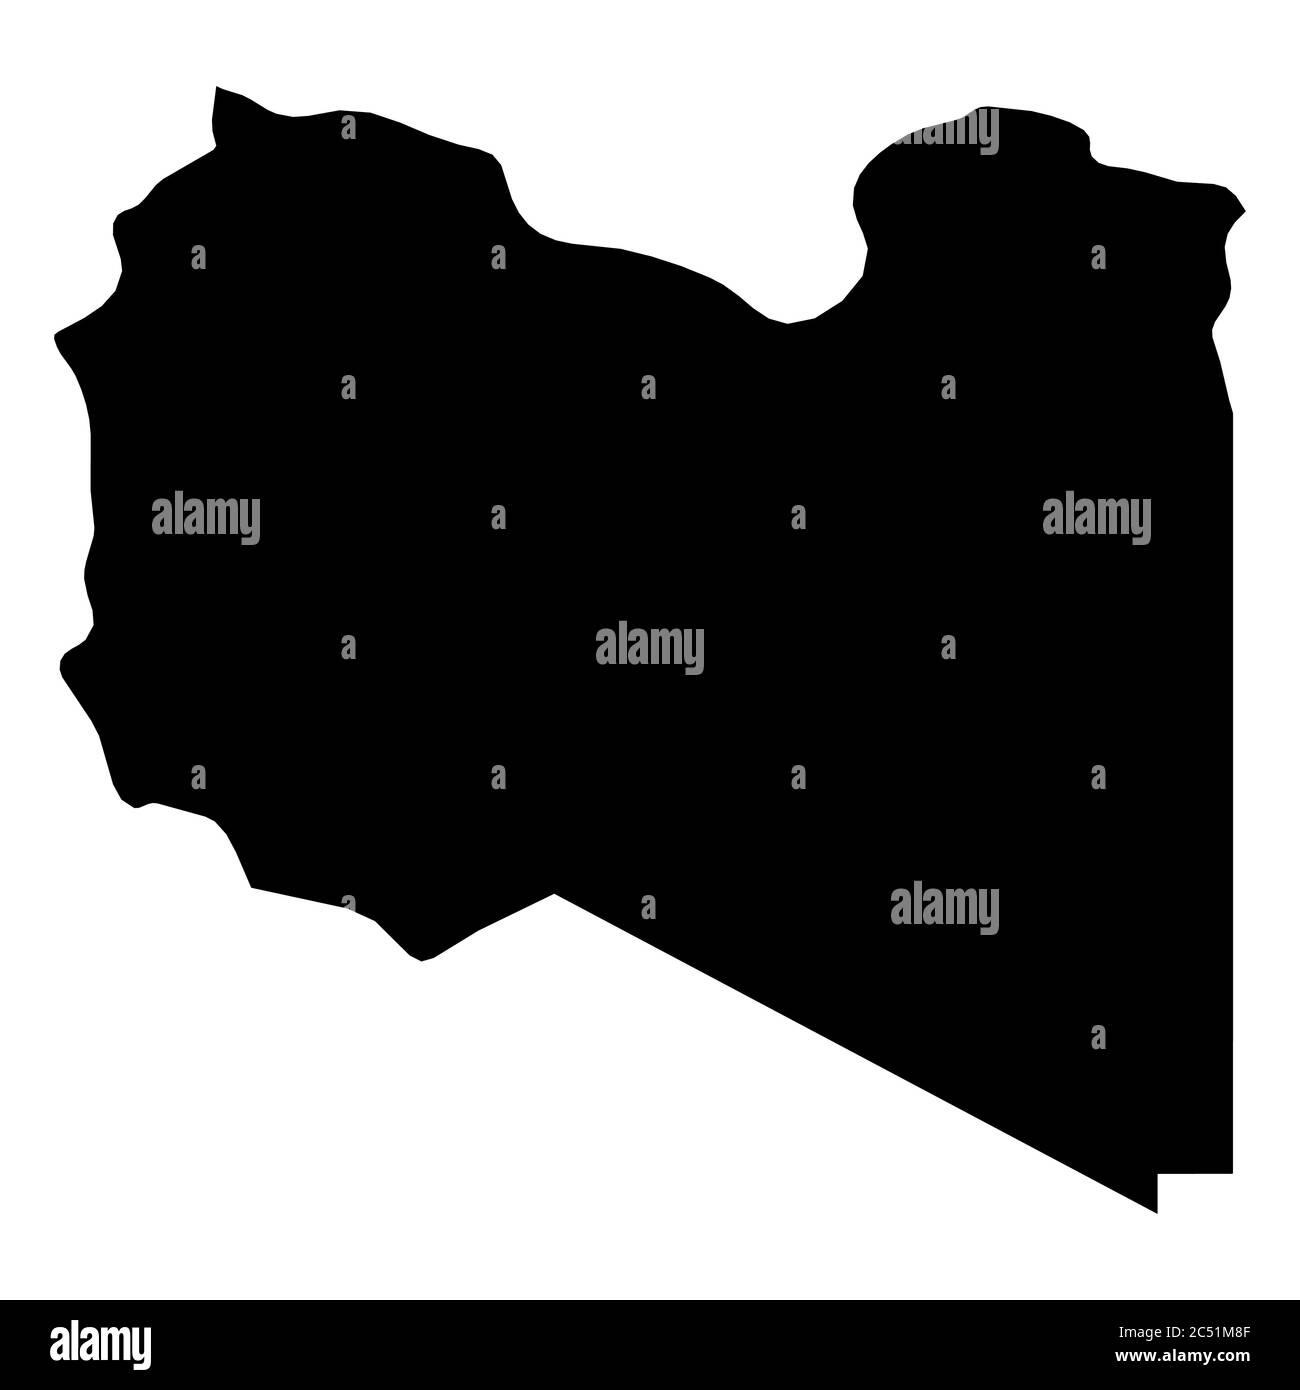 Libya - solid black silhouette map of country area. Simple flat vector illustration. Stock Vector